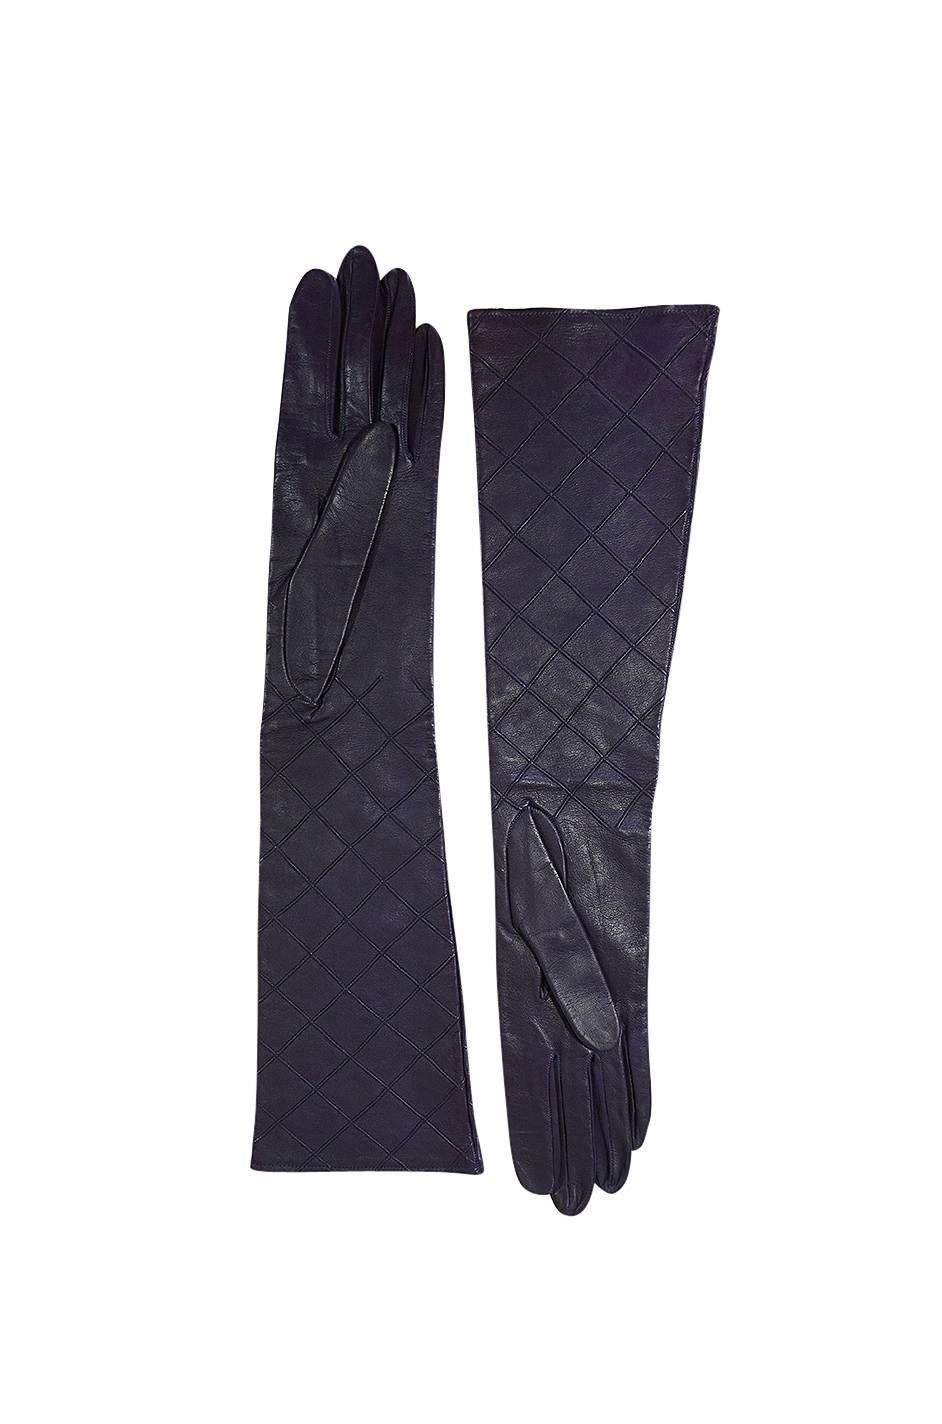 

Wonderful Chanel gloves that sit right to the elbow and that are made from the finest lightest kid leather that has been hand dyed to a beautiful purple color. They are lightly lined which allows them to perfectly mold to your hand and be